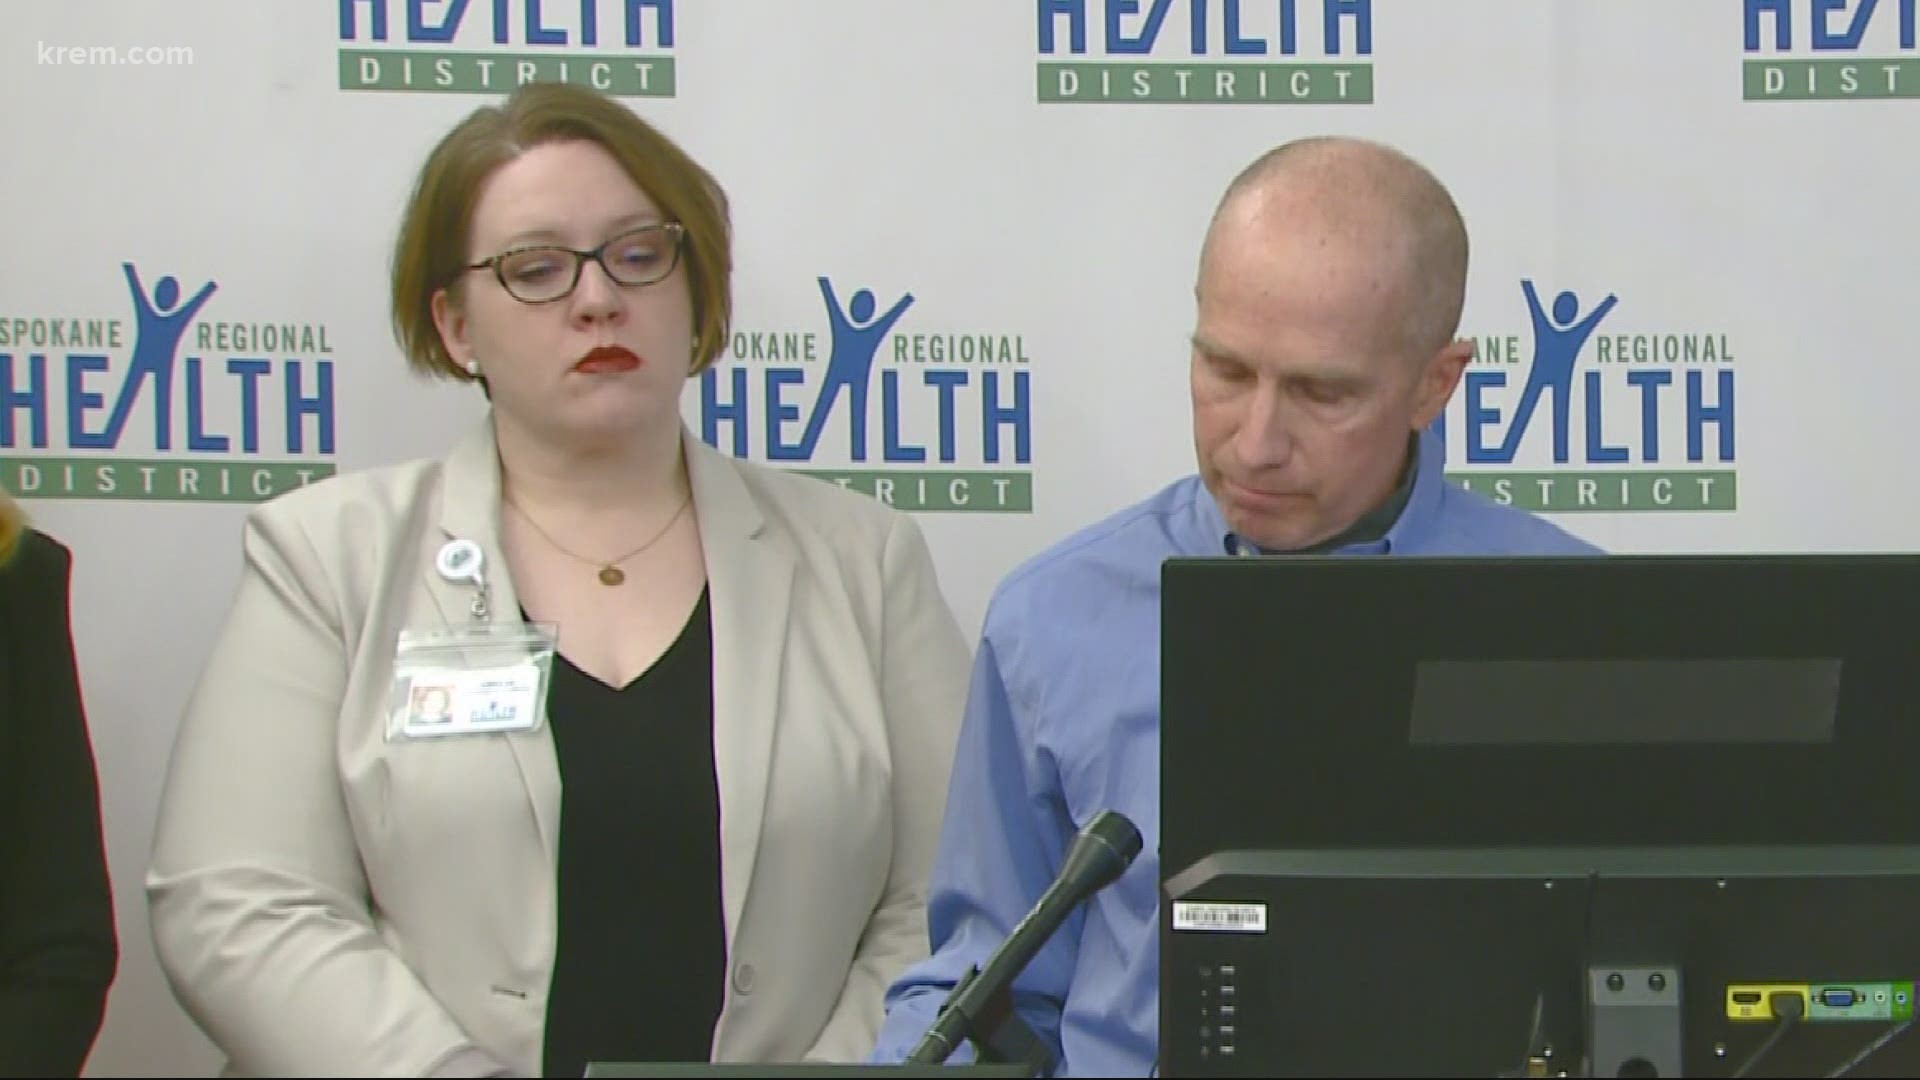 The state Board of Health approved a preliminary investigation into Administrator Amelia Clark's actions following the firing of Spokane County's health officer.